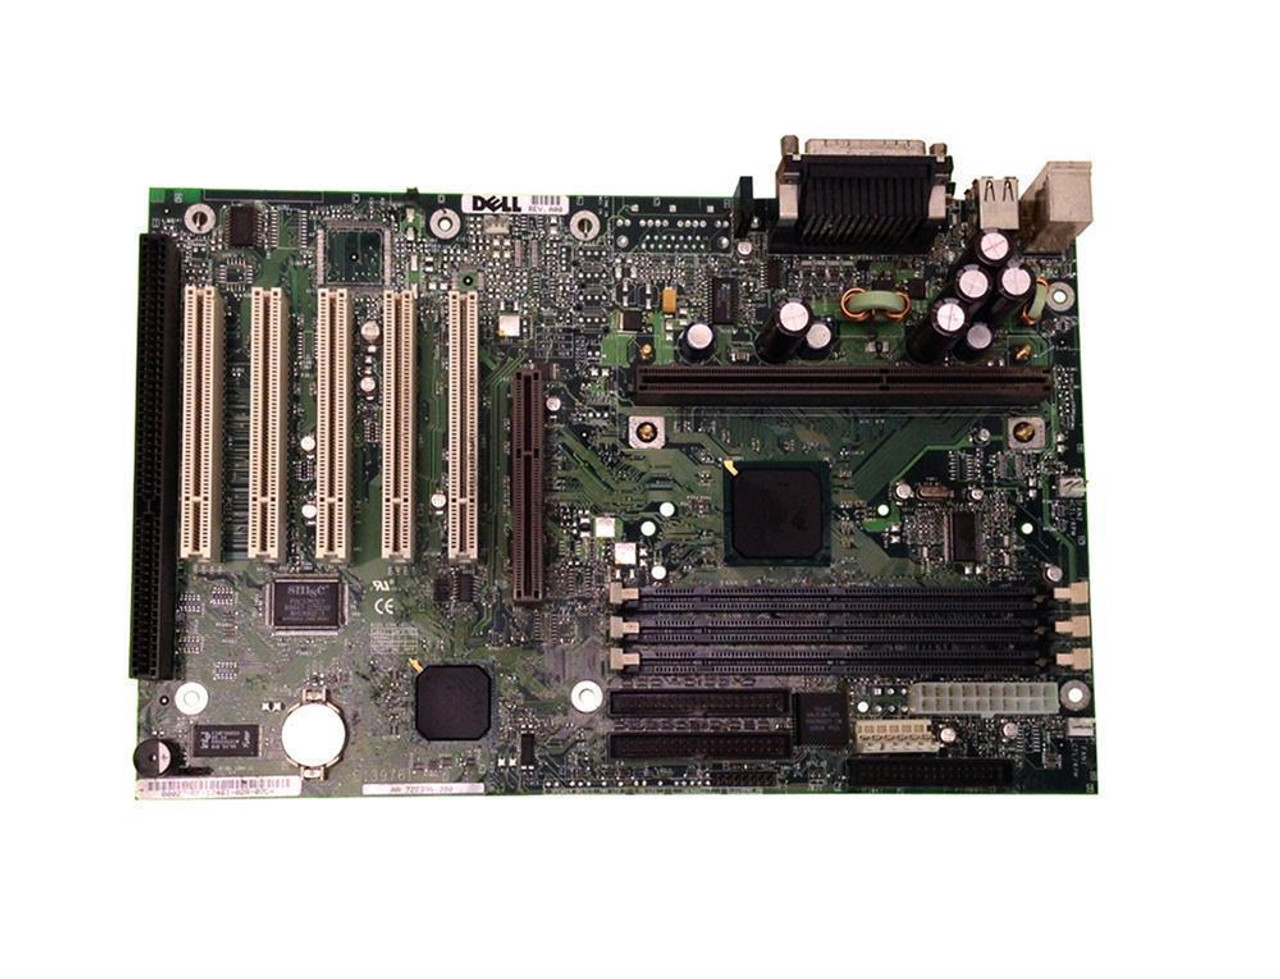 083MWP Dell System Board (Motherboard) For Dimension XPS (Refurbished)